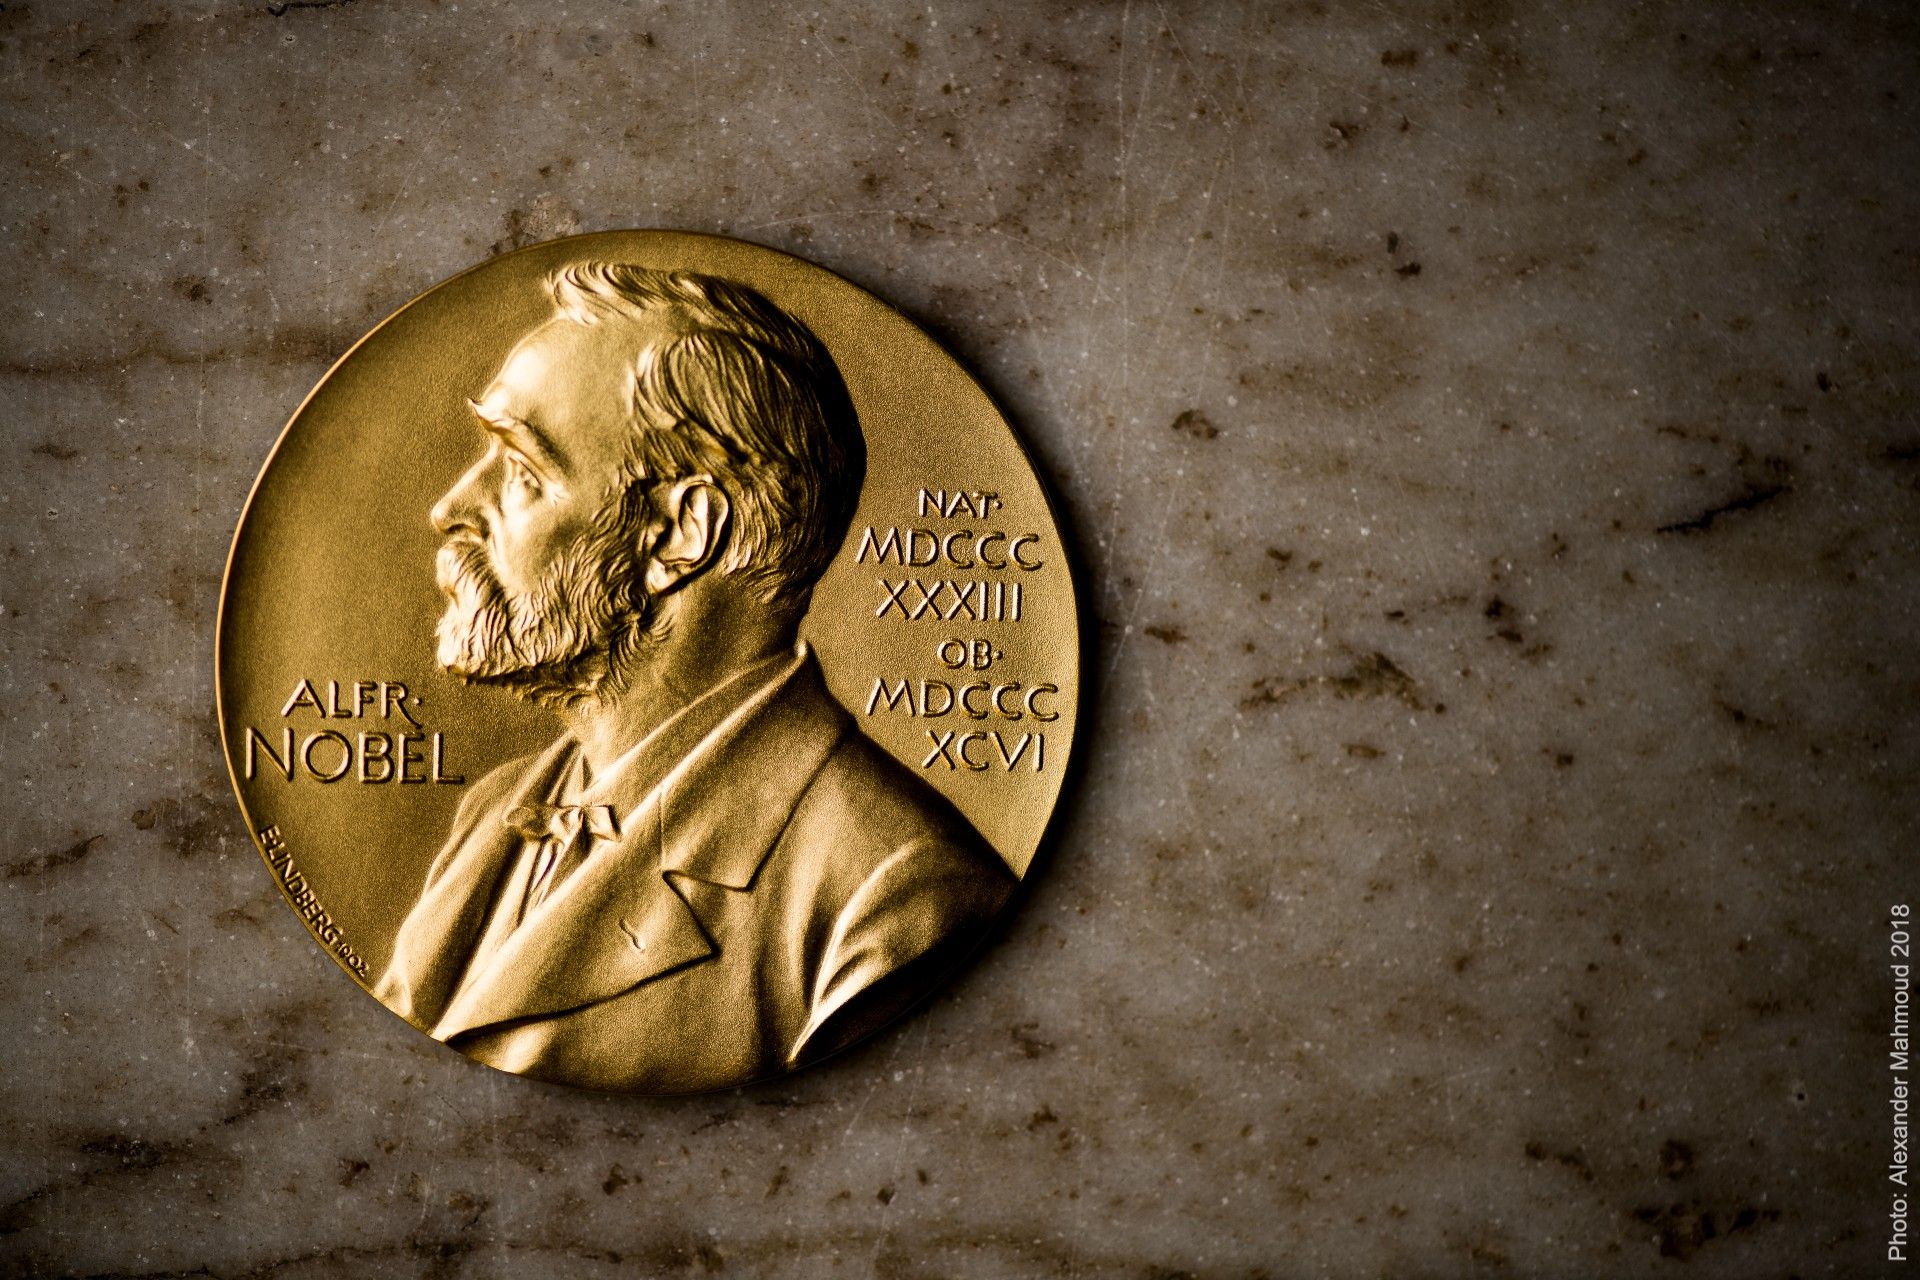 How do you win a Nobel Prize?